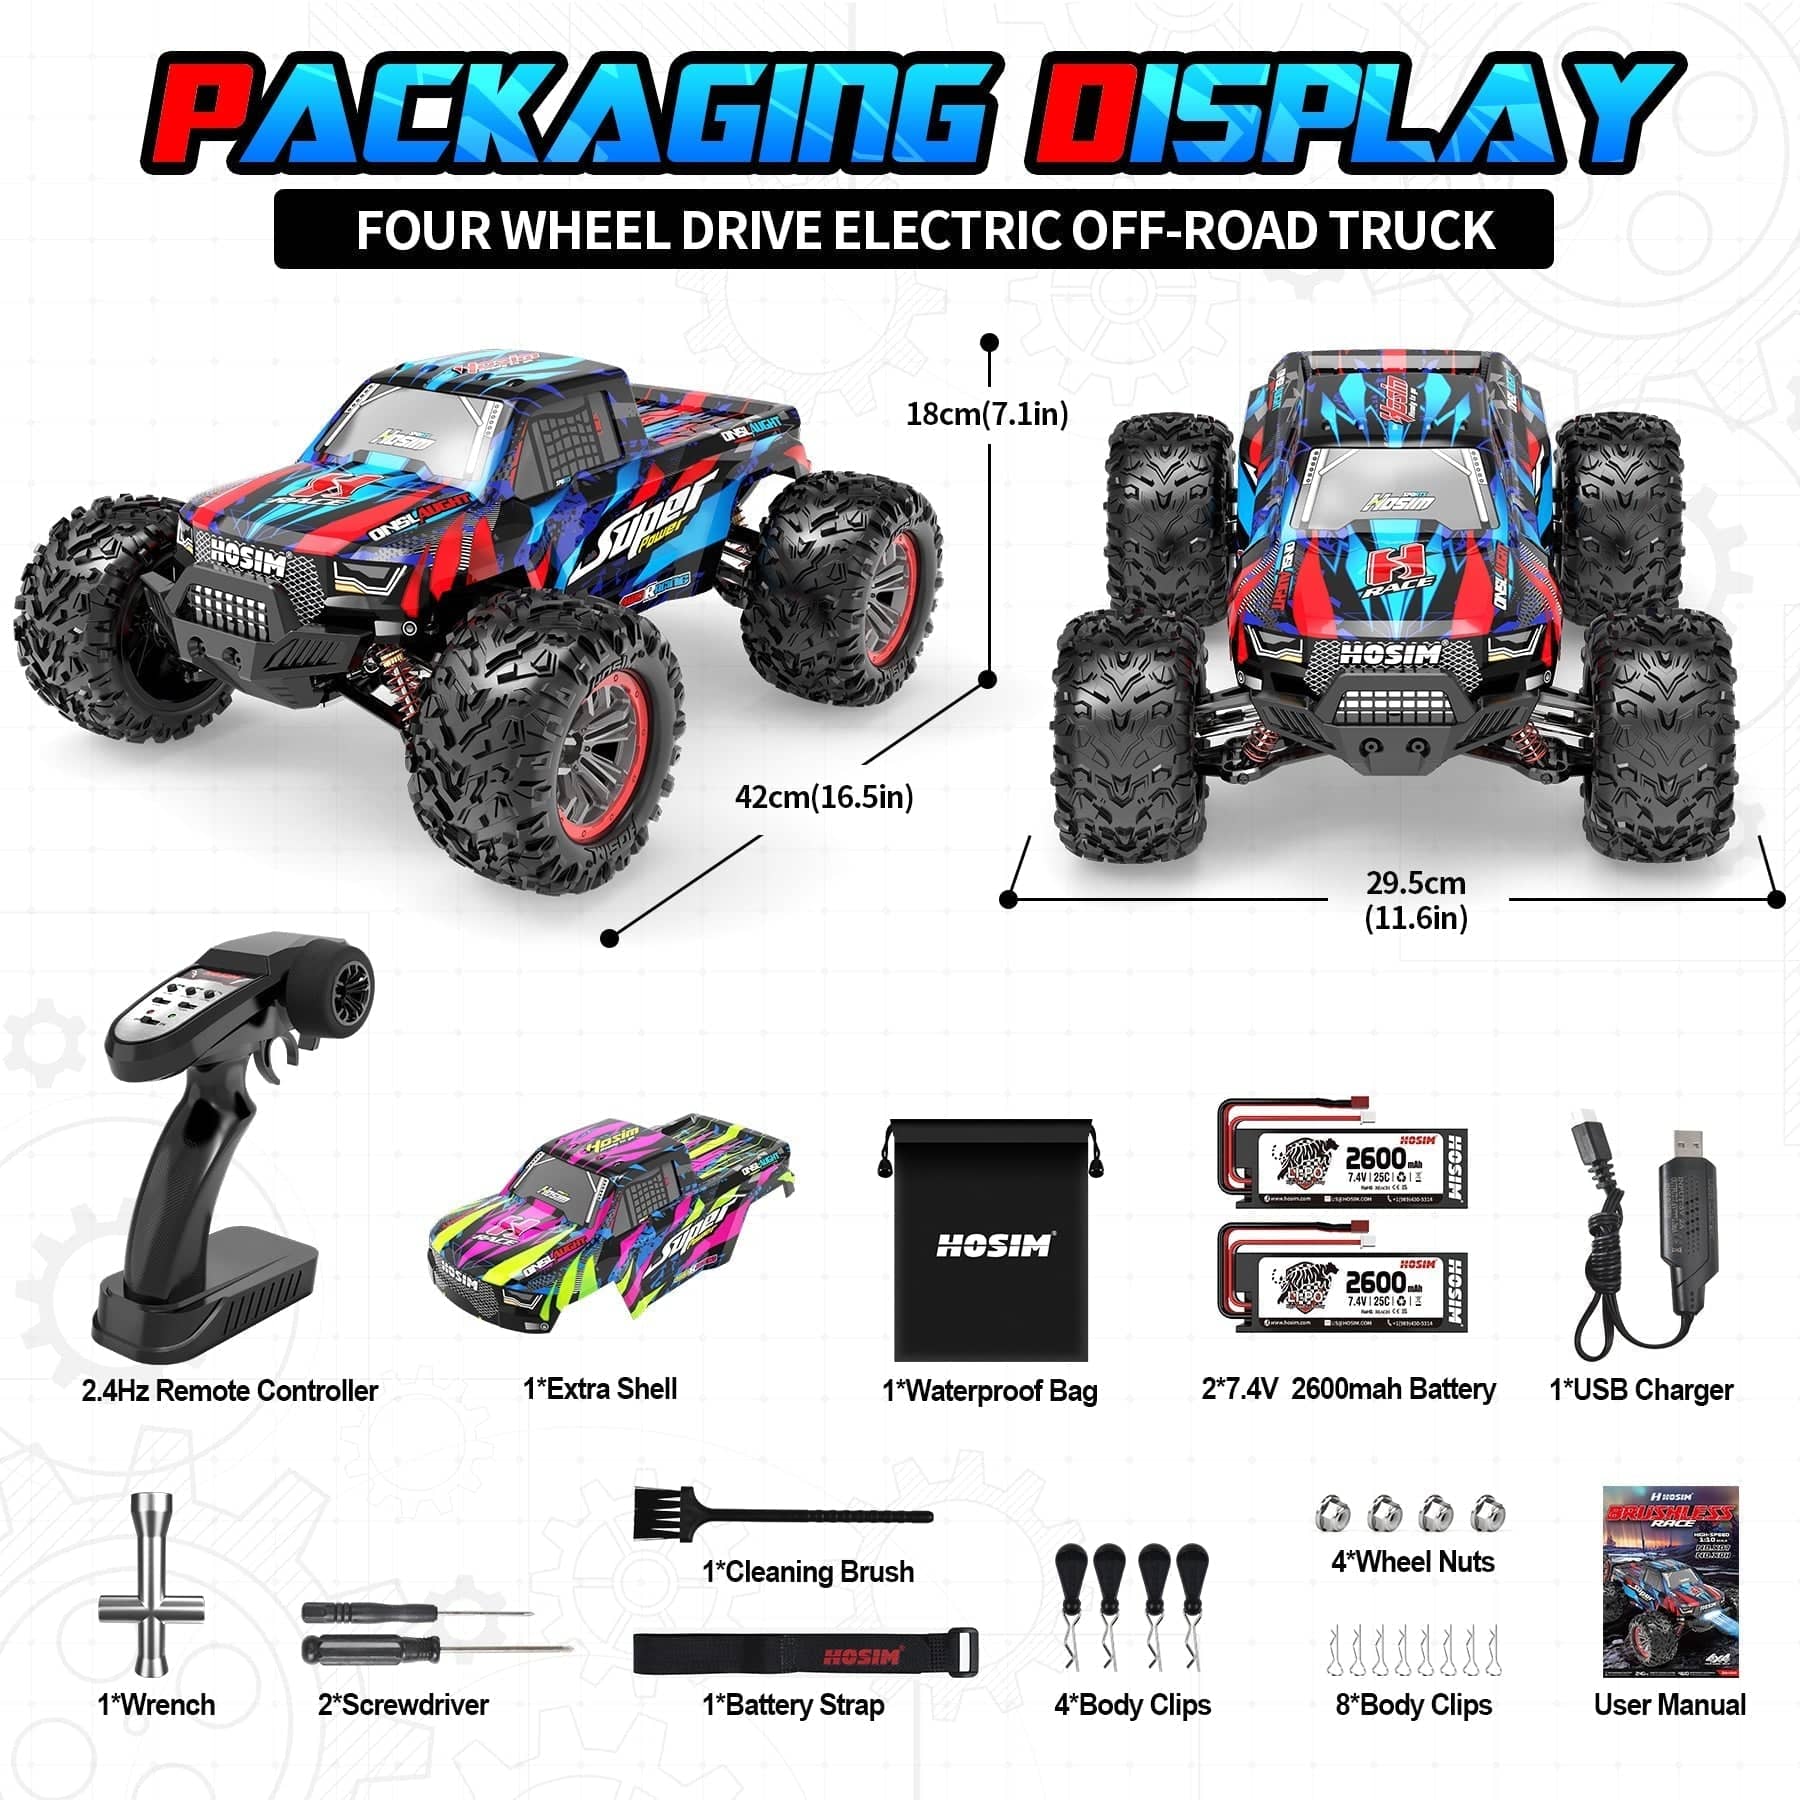 Hosim 1:10 Brushless RC Car Monster Truck Remote Contol Car 4WD Off Road Drift Racing Car（jacobp.rc）